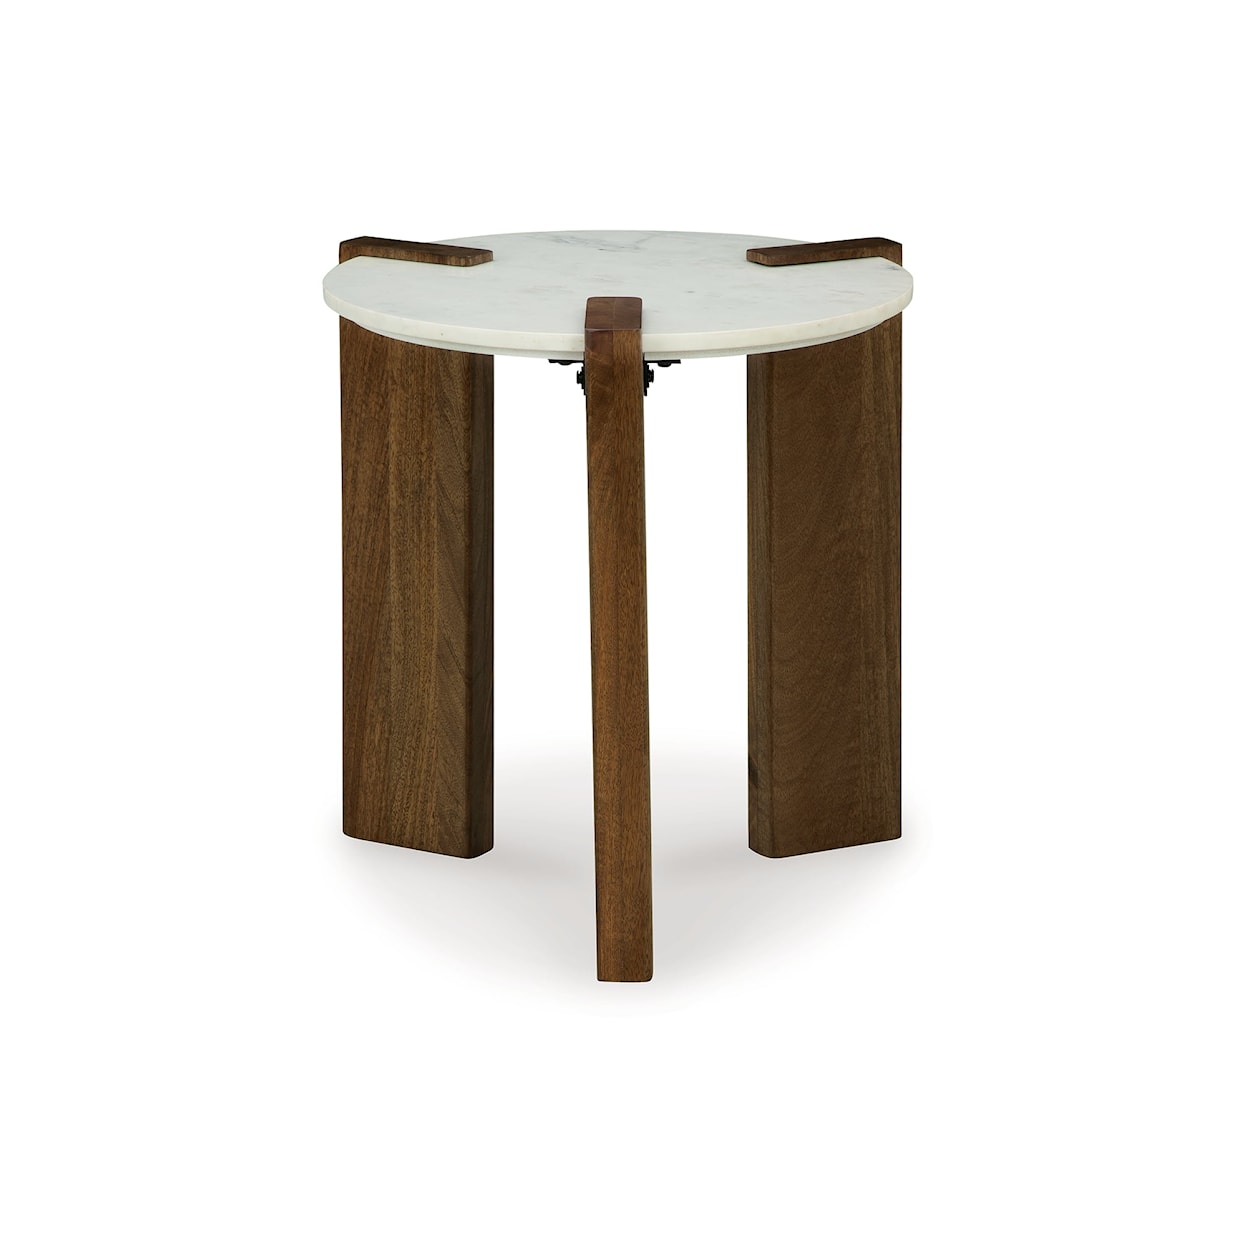 Benchcraft Isanti Round End Table